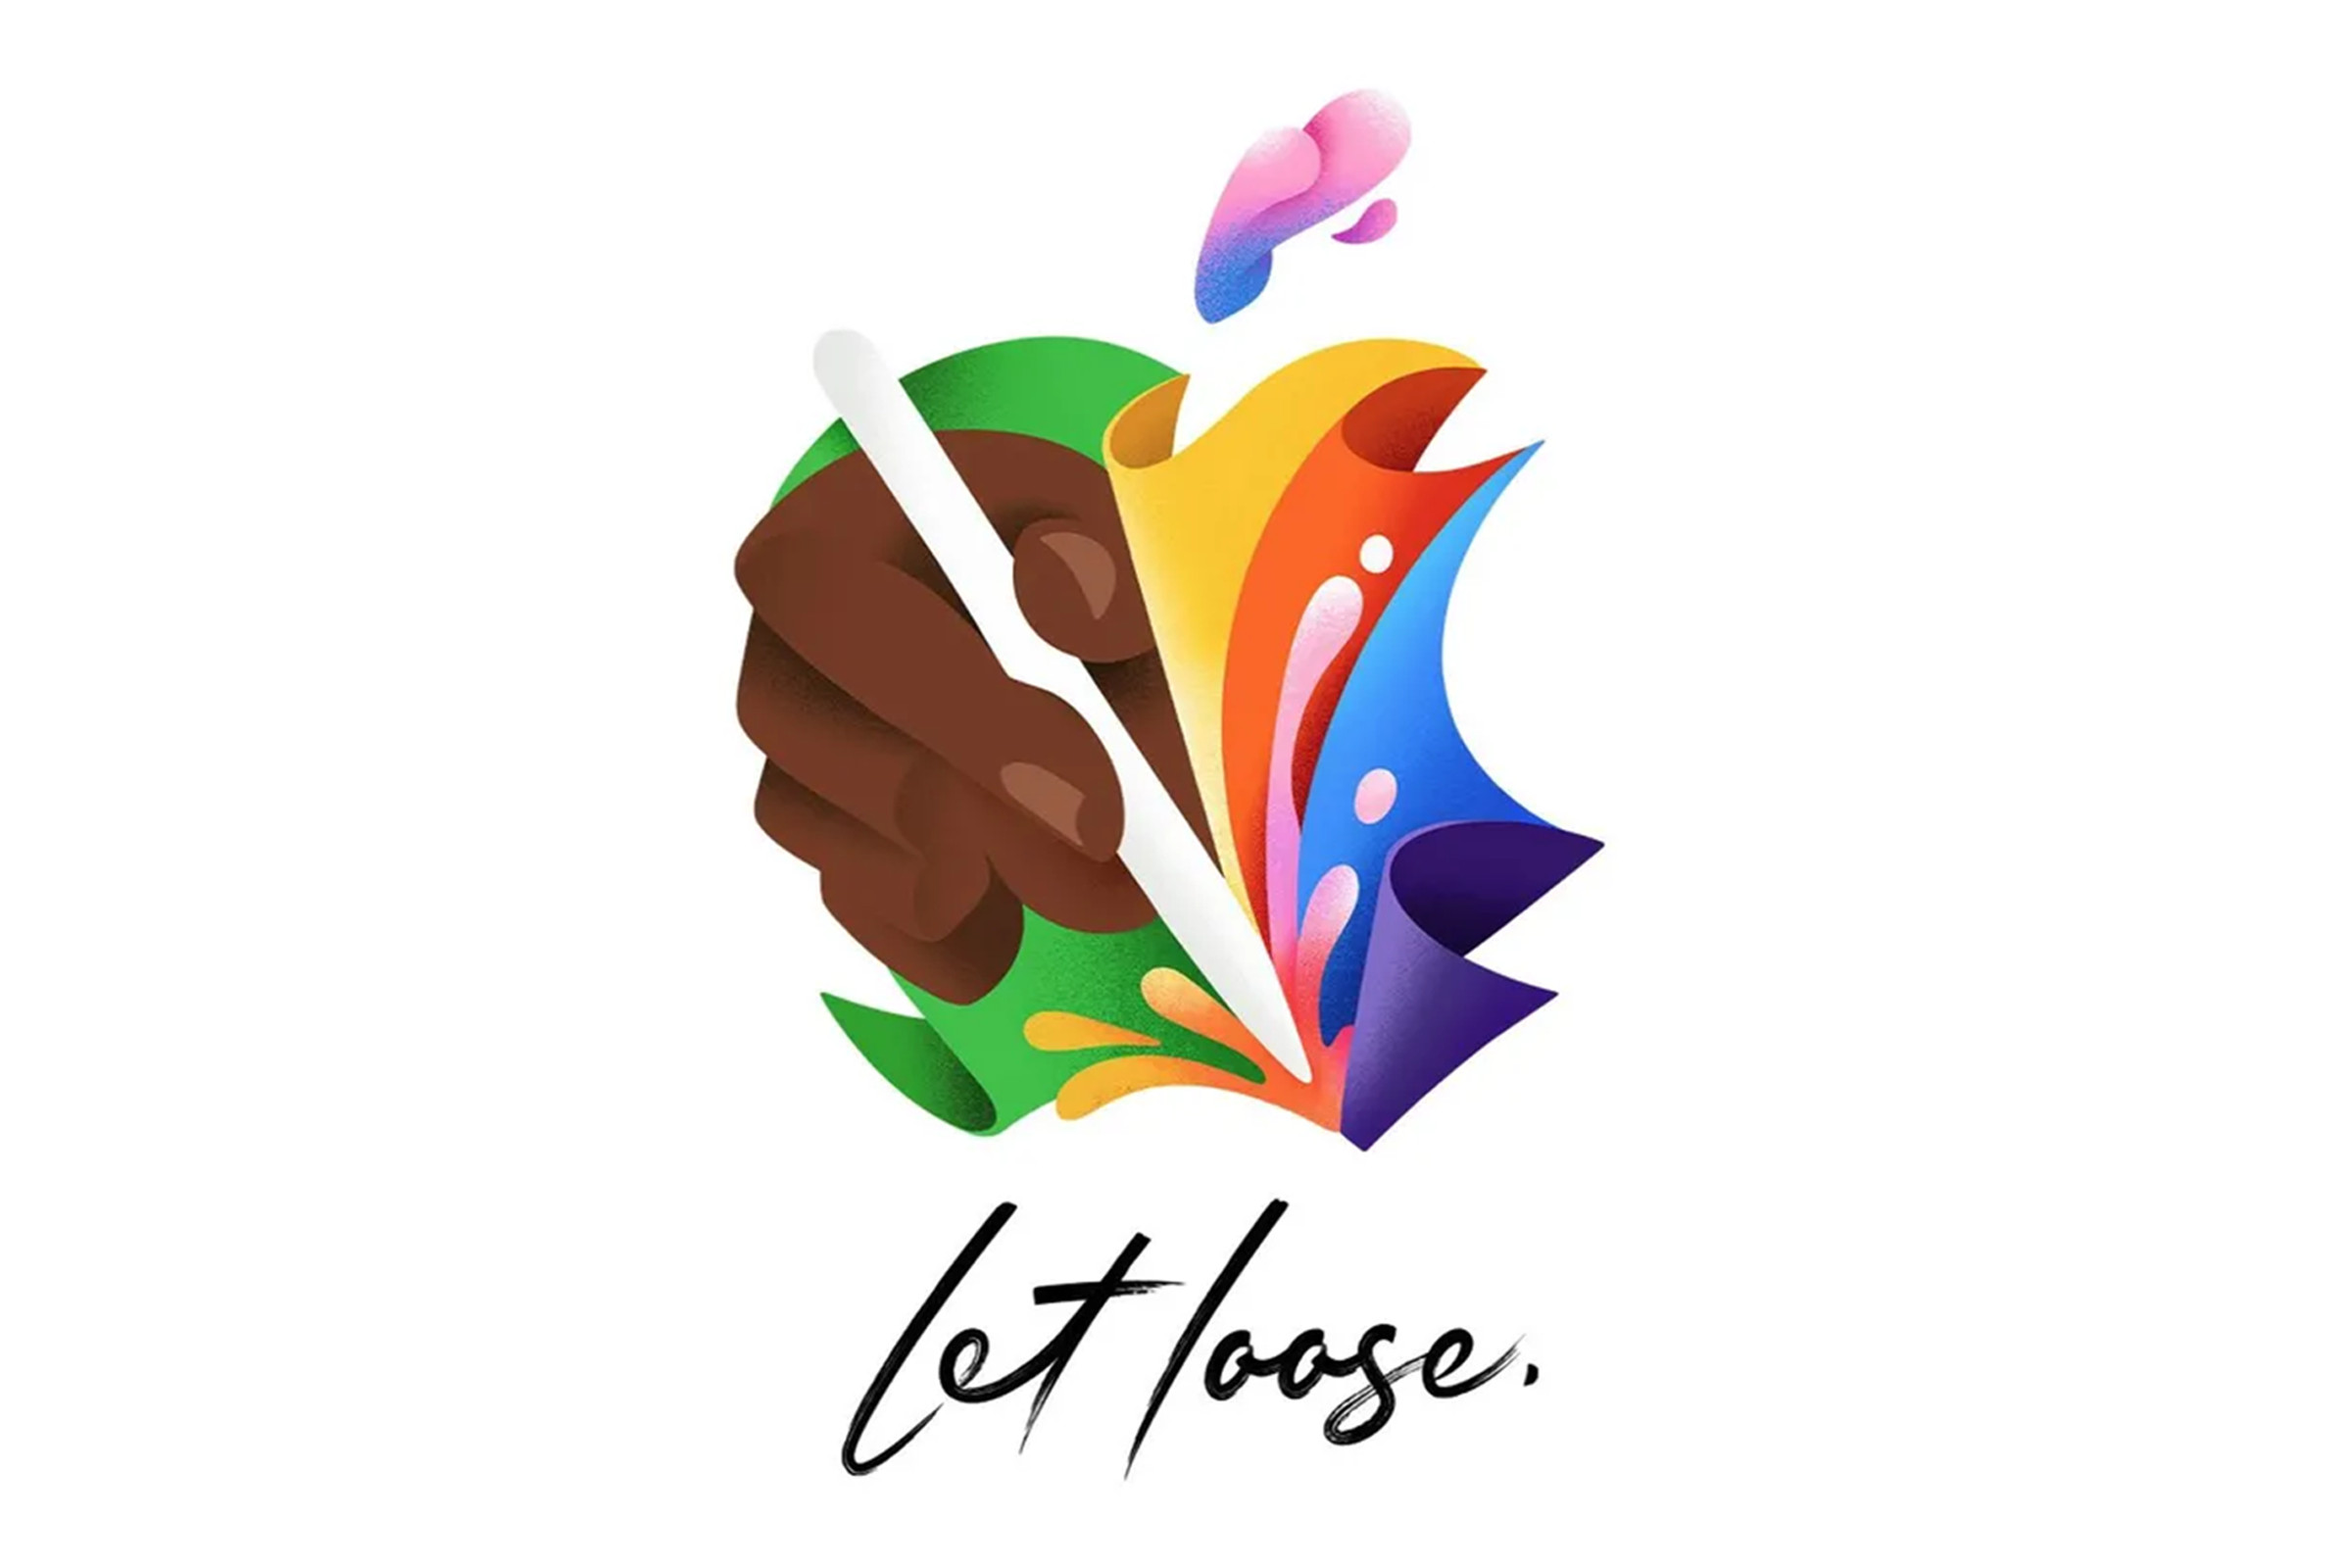 A version of the Apple logo featuring a hand holding an Apple Pencil and the words “Let loose.”